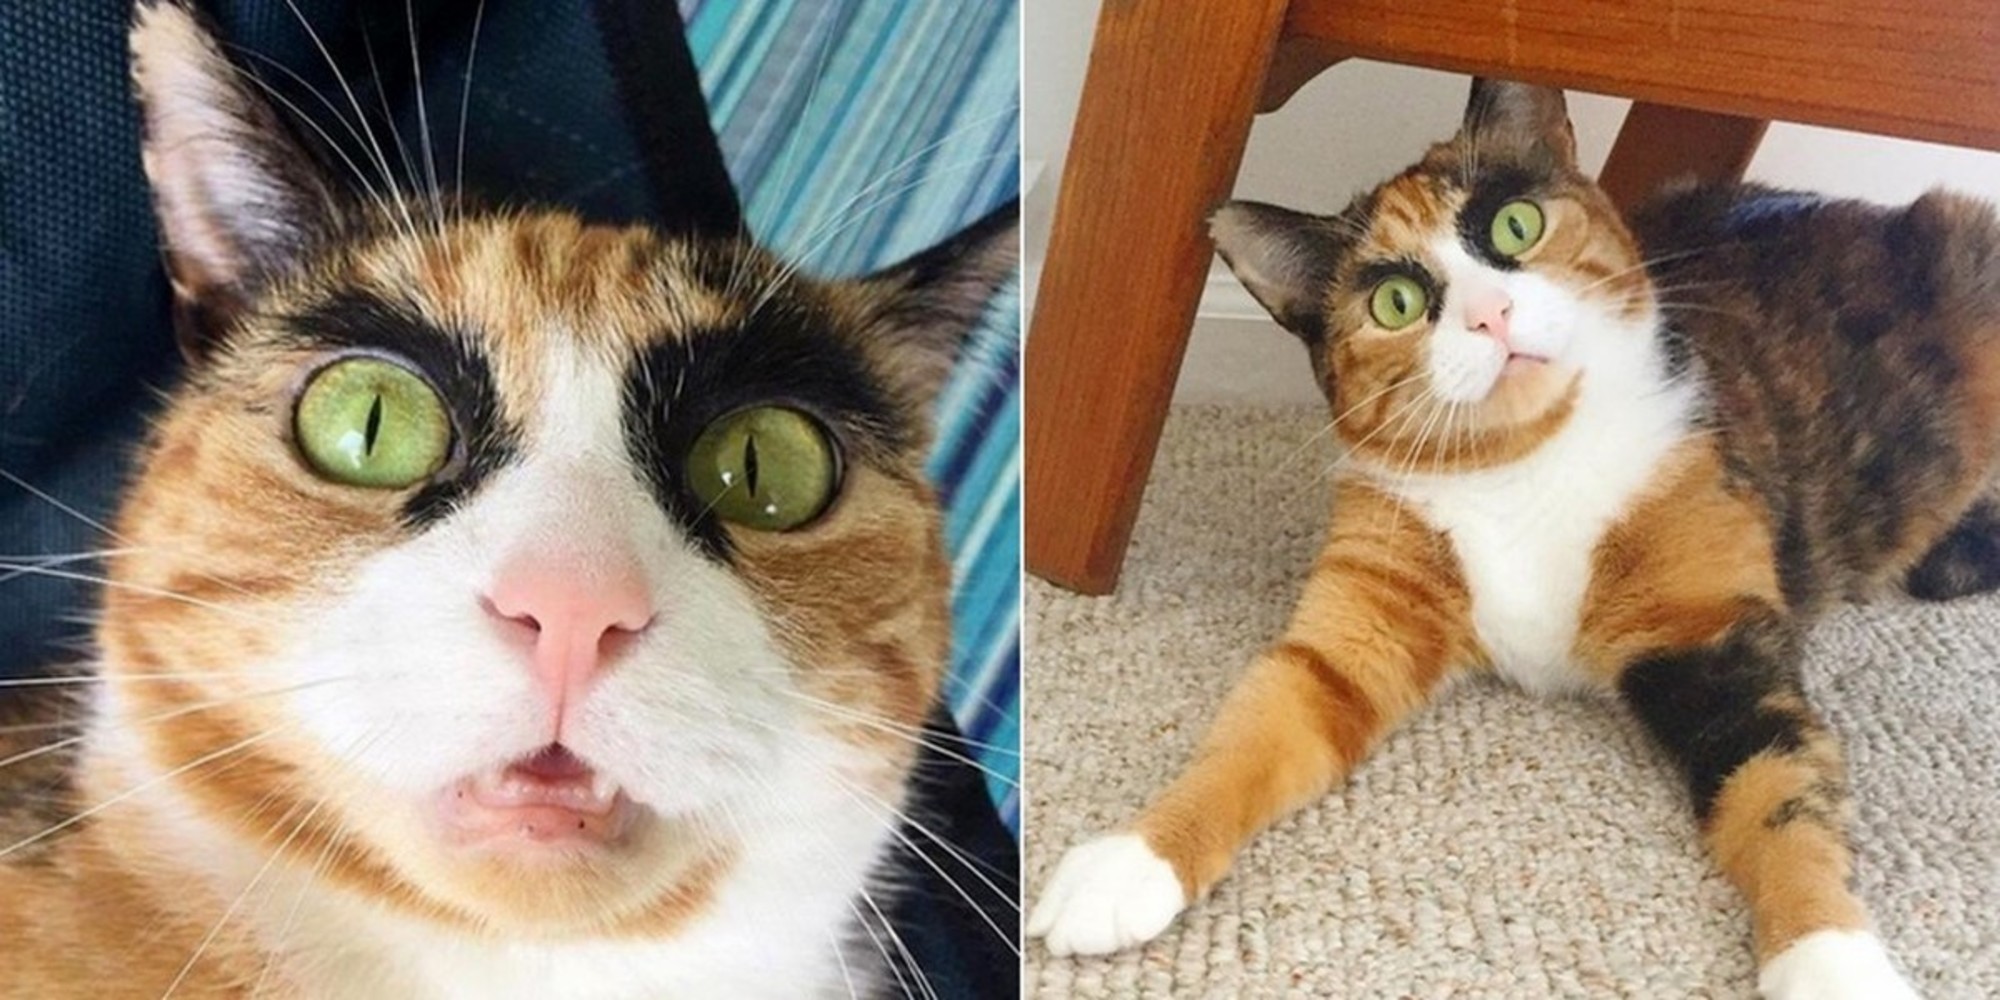 Calico Cat Judges Her Human Everyday with Her Epic Eyebrows | Catlov